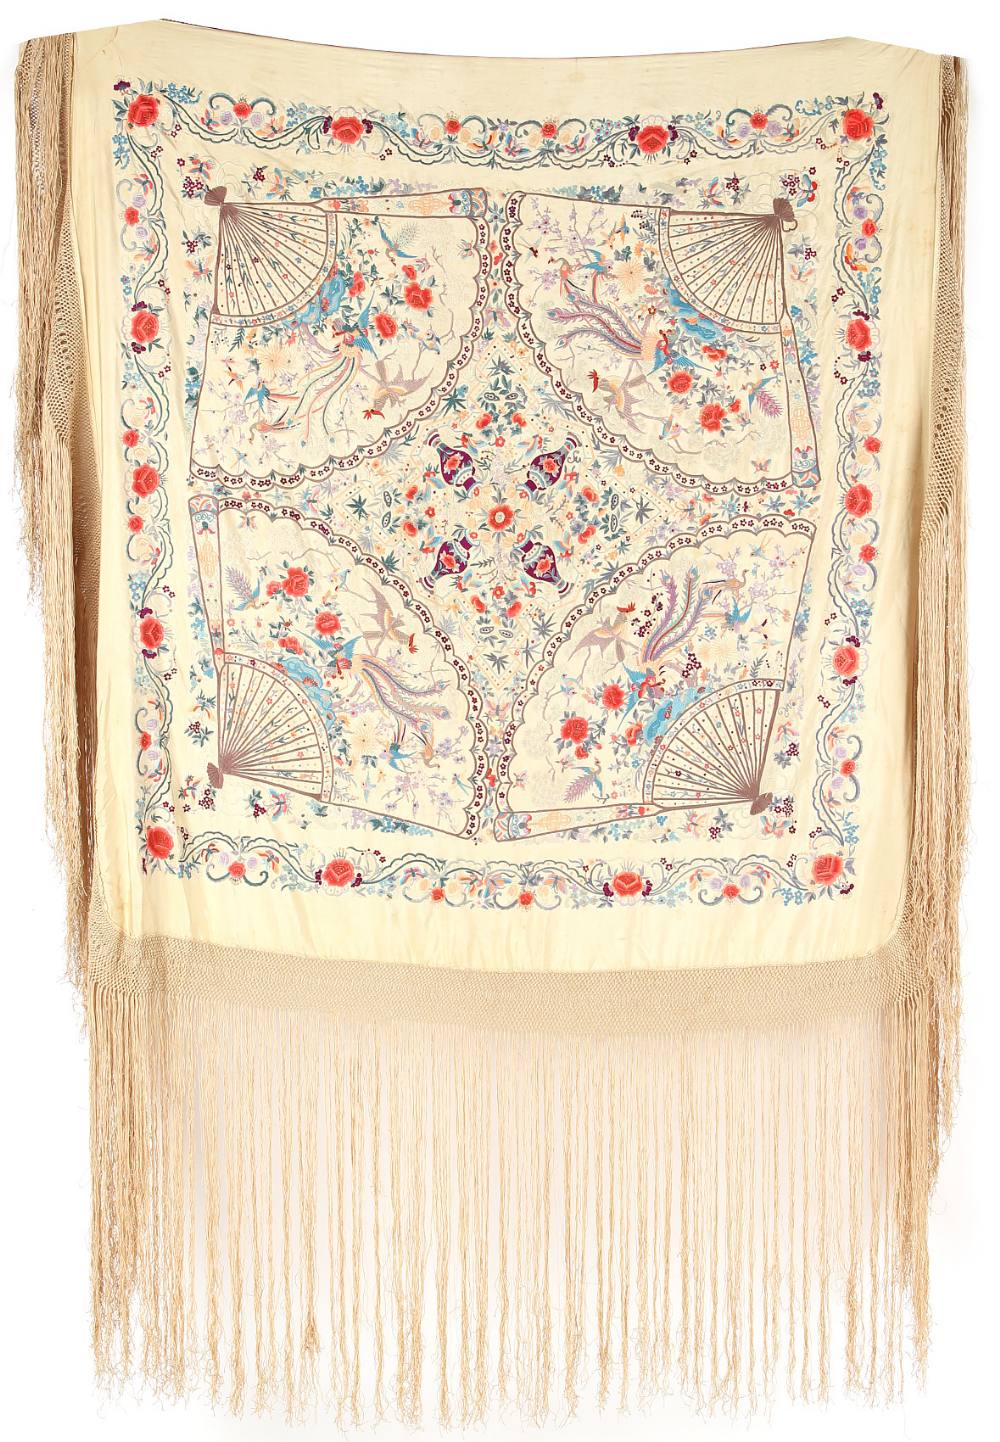 Property of a lady - a Chinese embroidered silk shawl, late 19th / early 20th century, with exotic